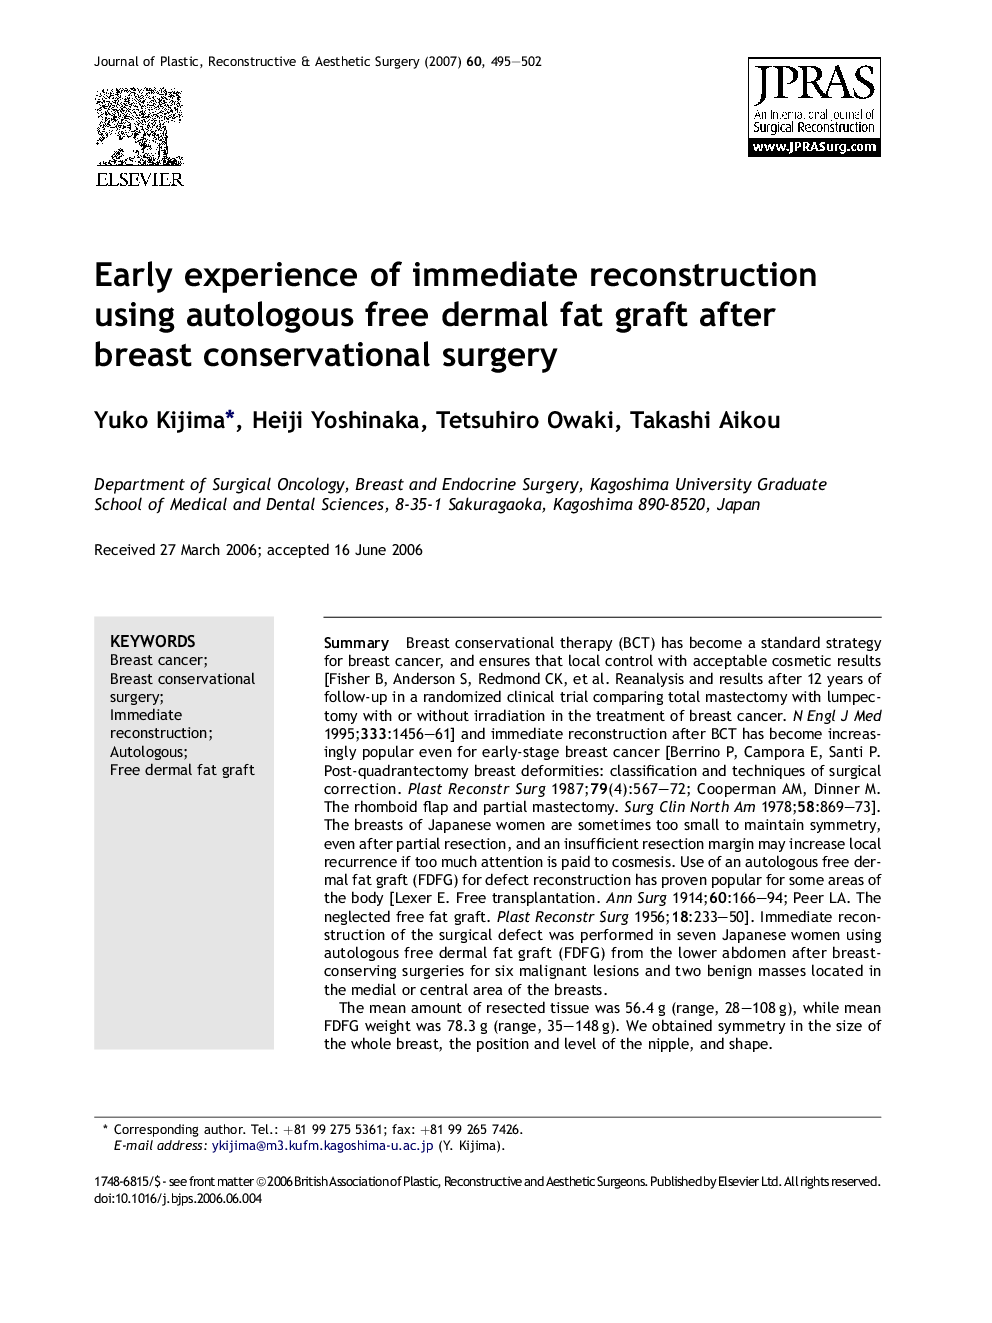 Early experience of immediate reconstruction using autologous free dermal fat graft after breast conservational surgery